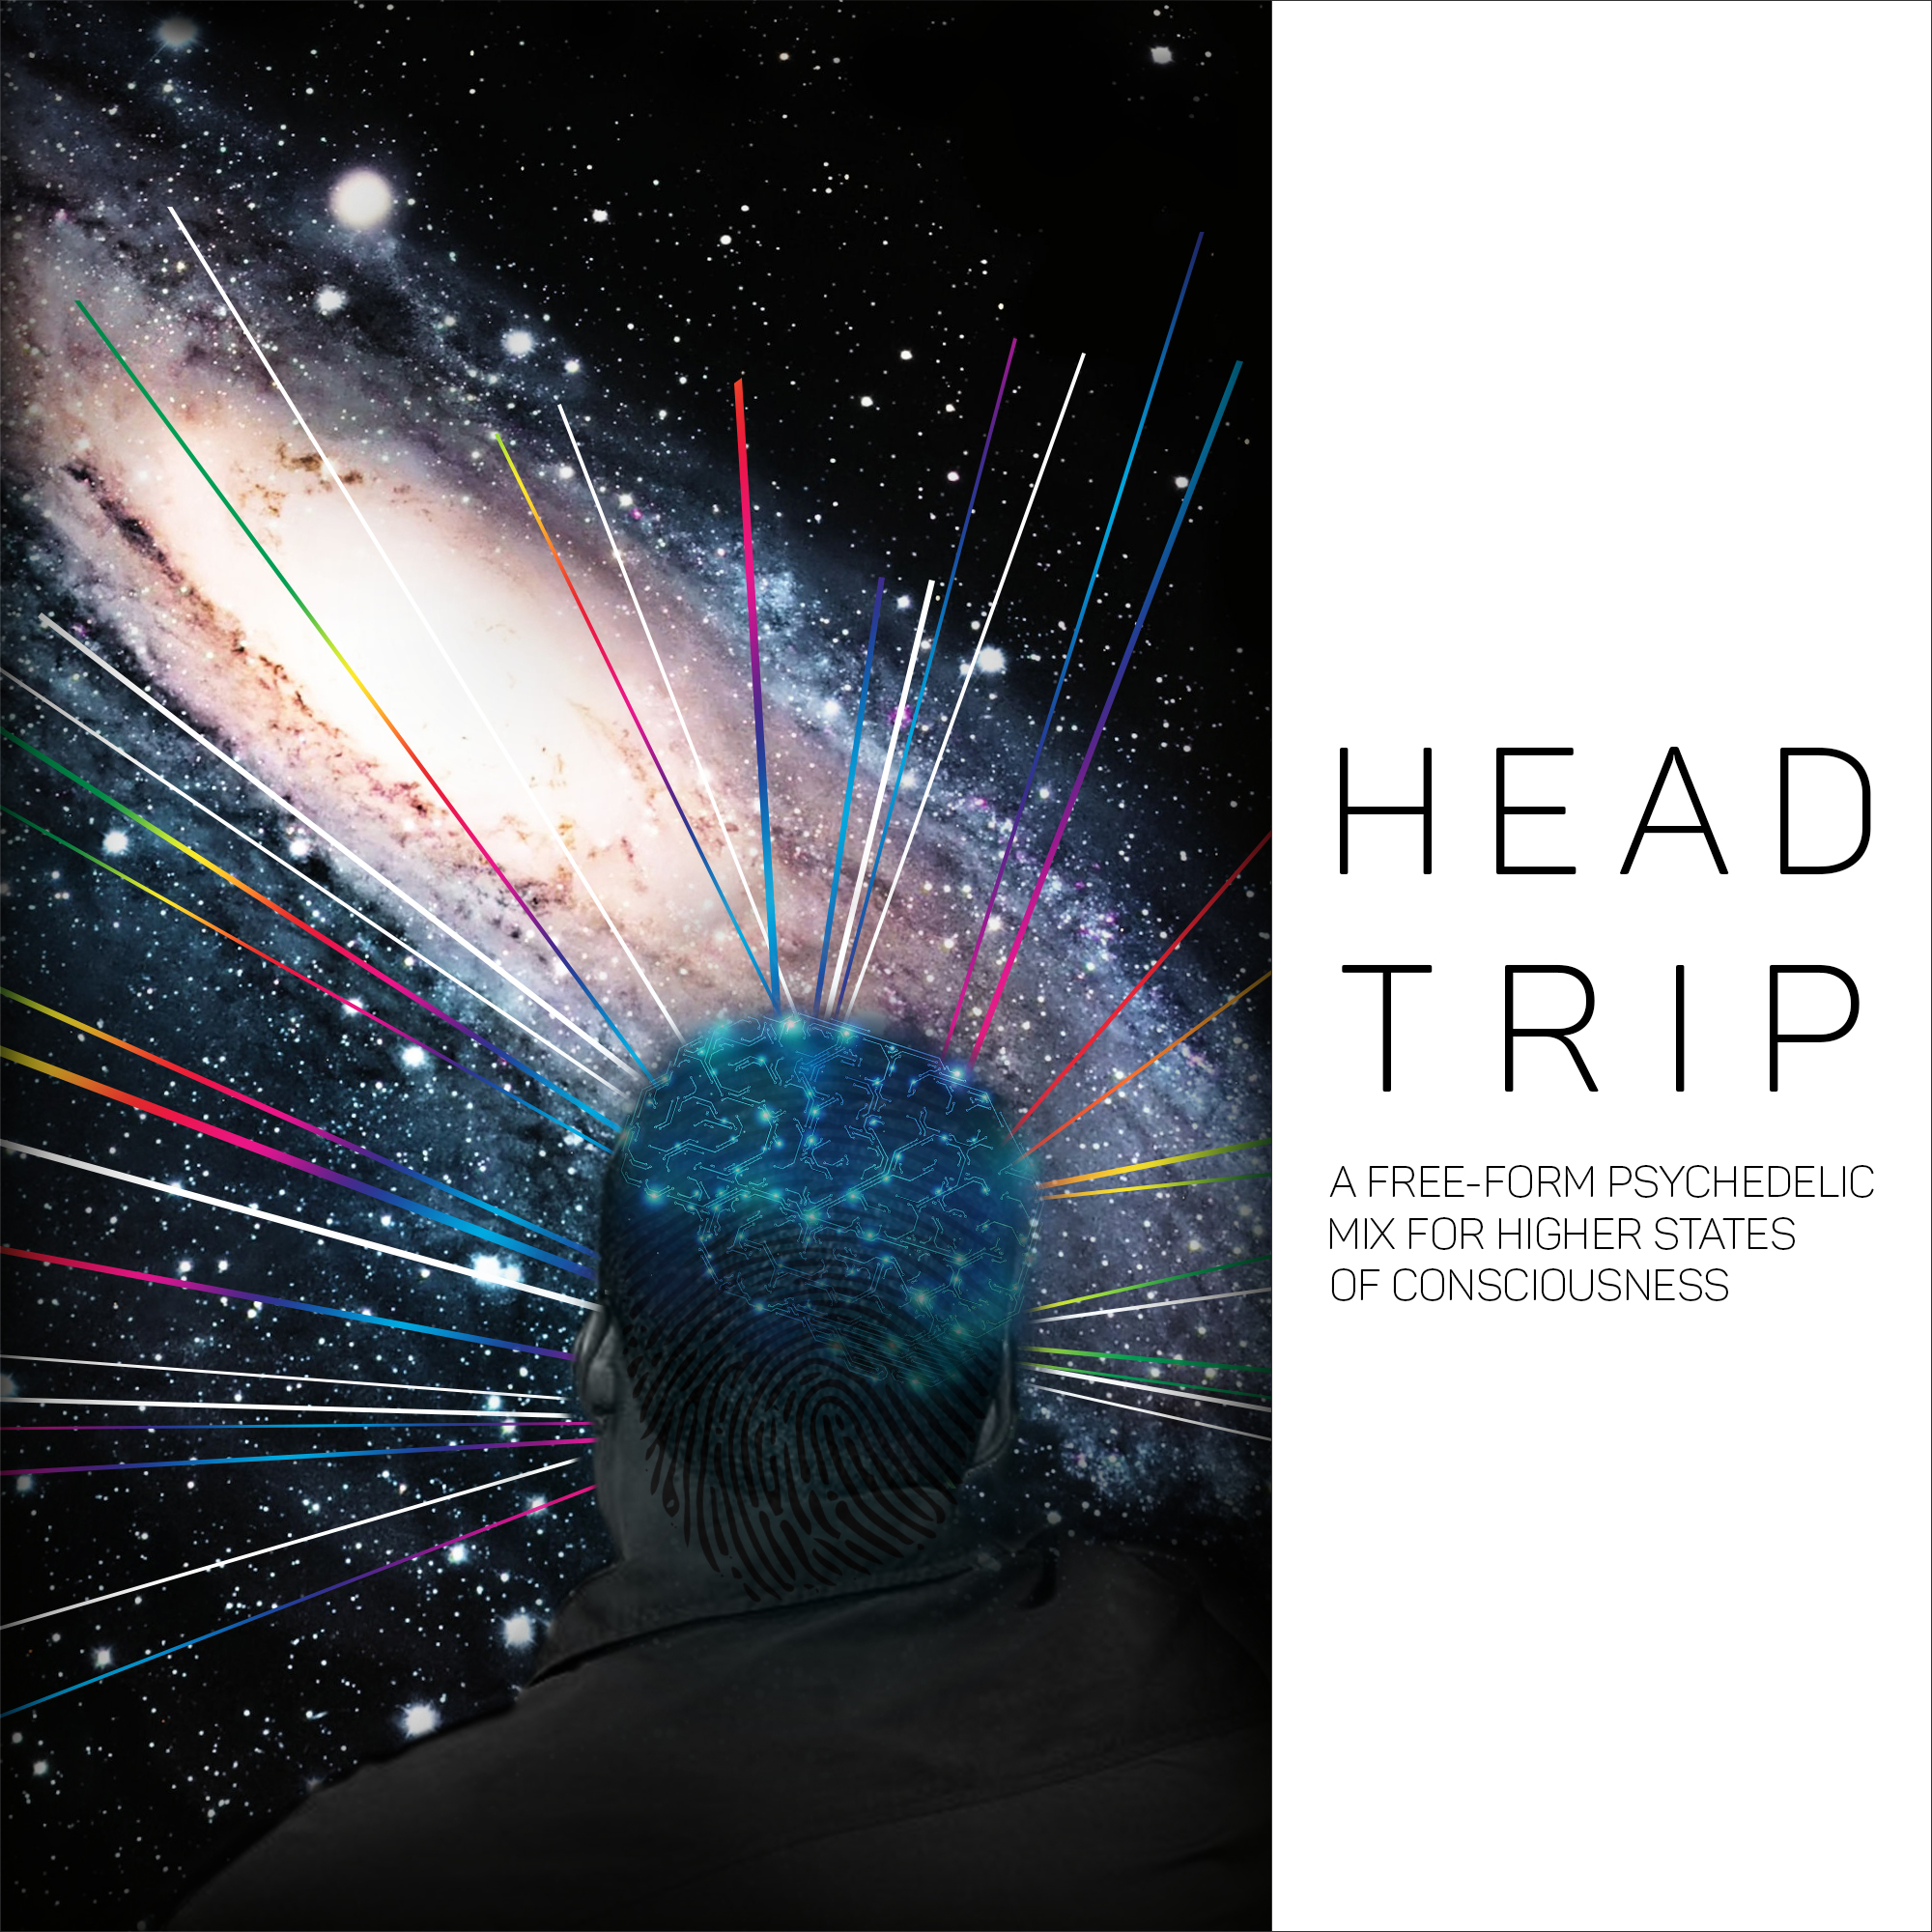 Our playlist “Head Trip” got fully updated with the best in journey music, for higher states of consciousness